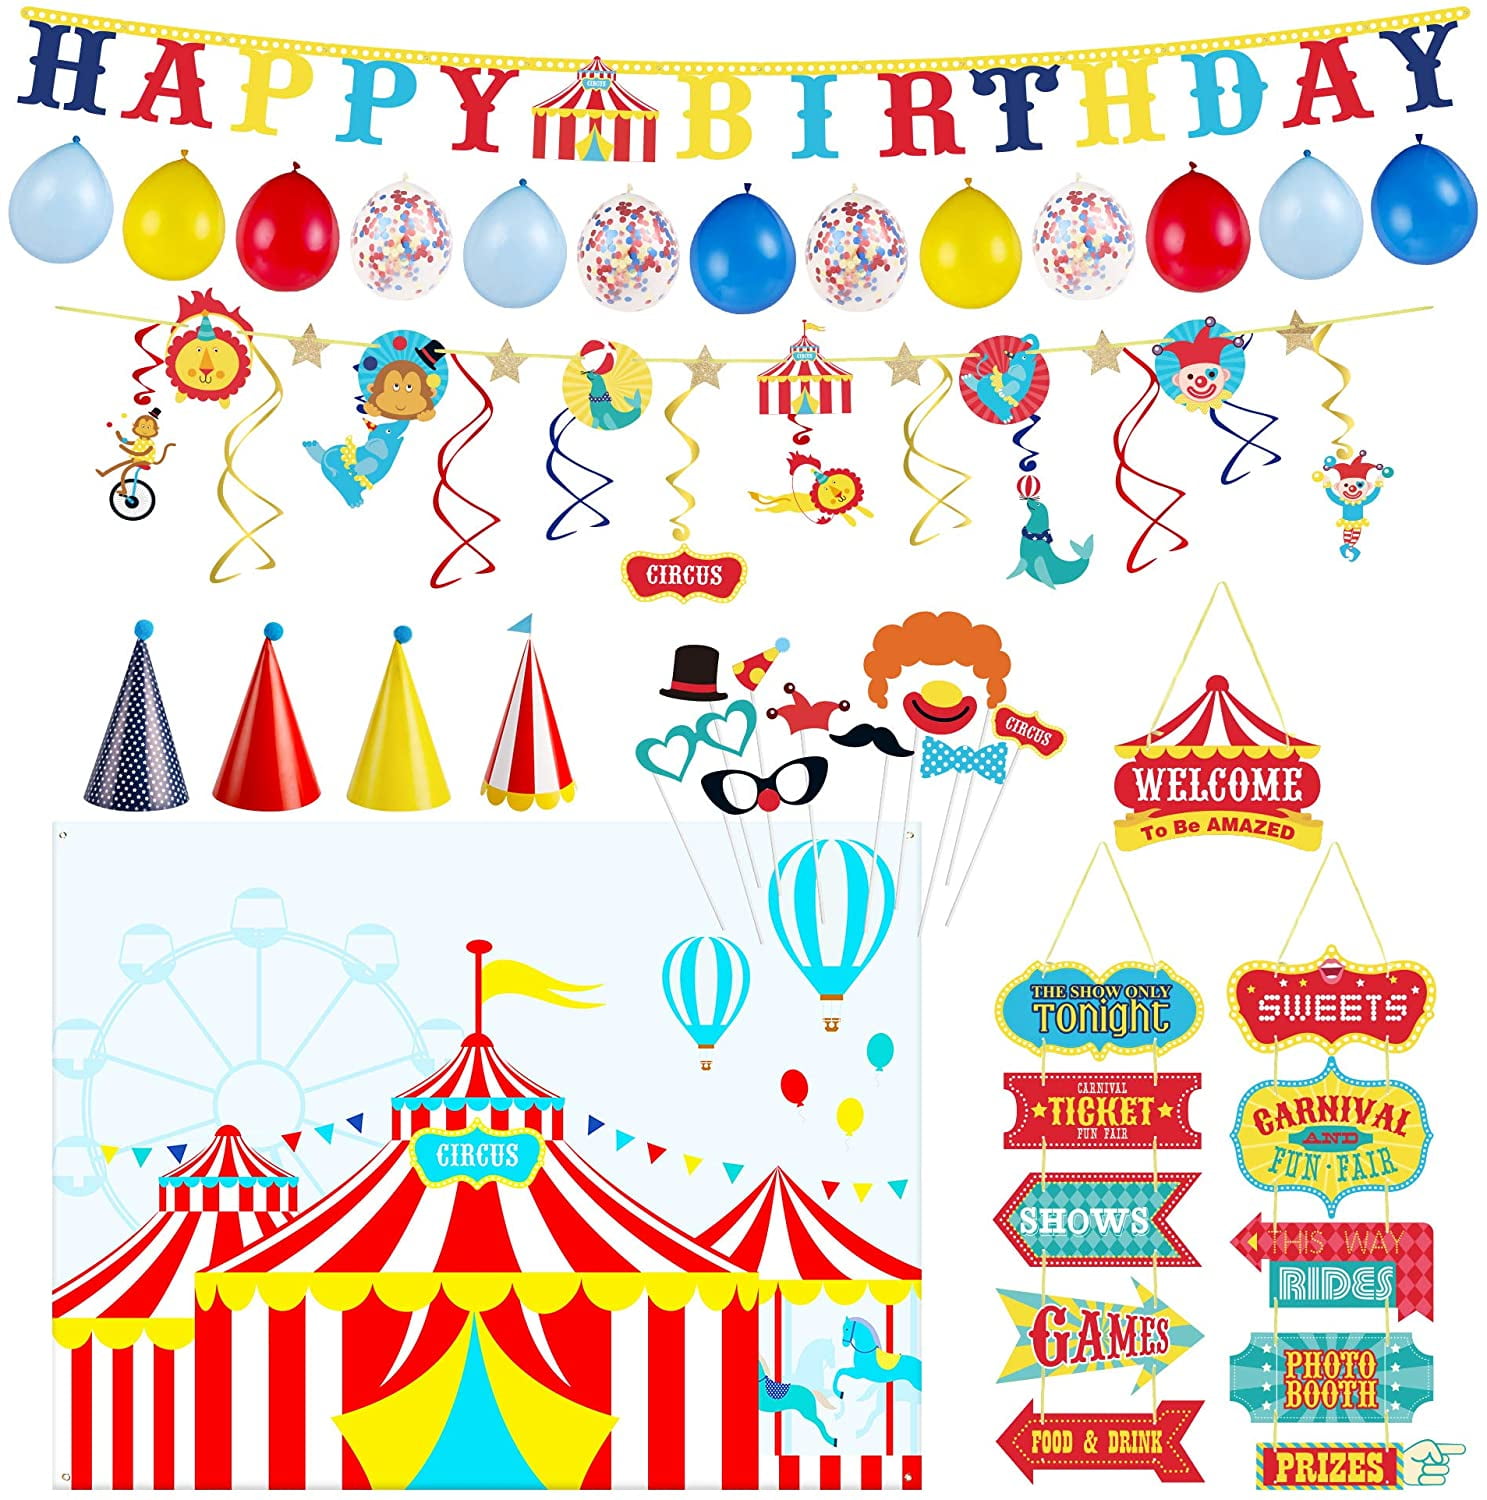 Among Gaming Party Decoration Set Birthday Supplies Packs Includes Banner Balloons Hanging Swirls Ceiling Streamers Decor for Kids Girls Boys Us Video Game Carnival Themed Favors 